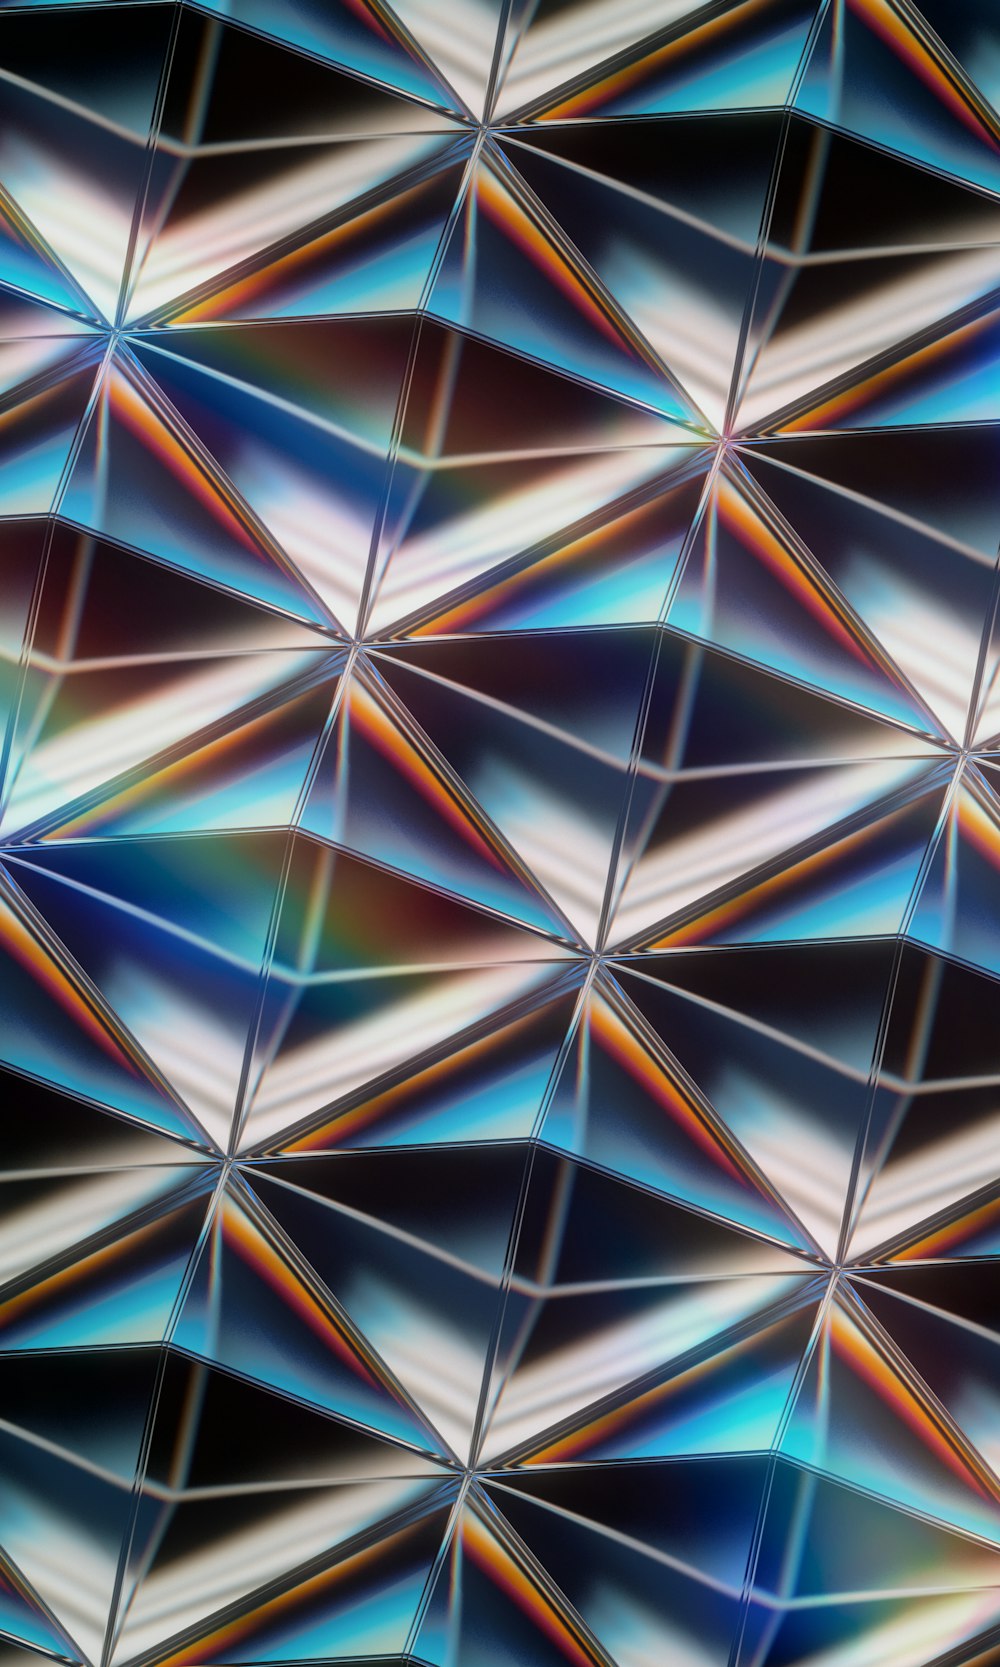 an abstract image of a pattern made up of triangles